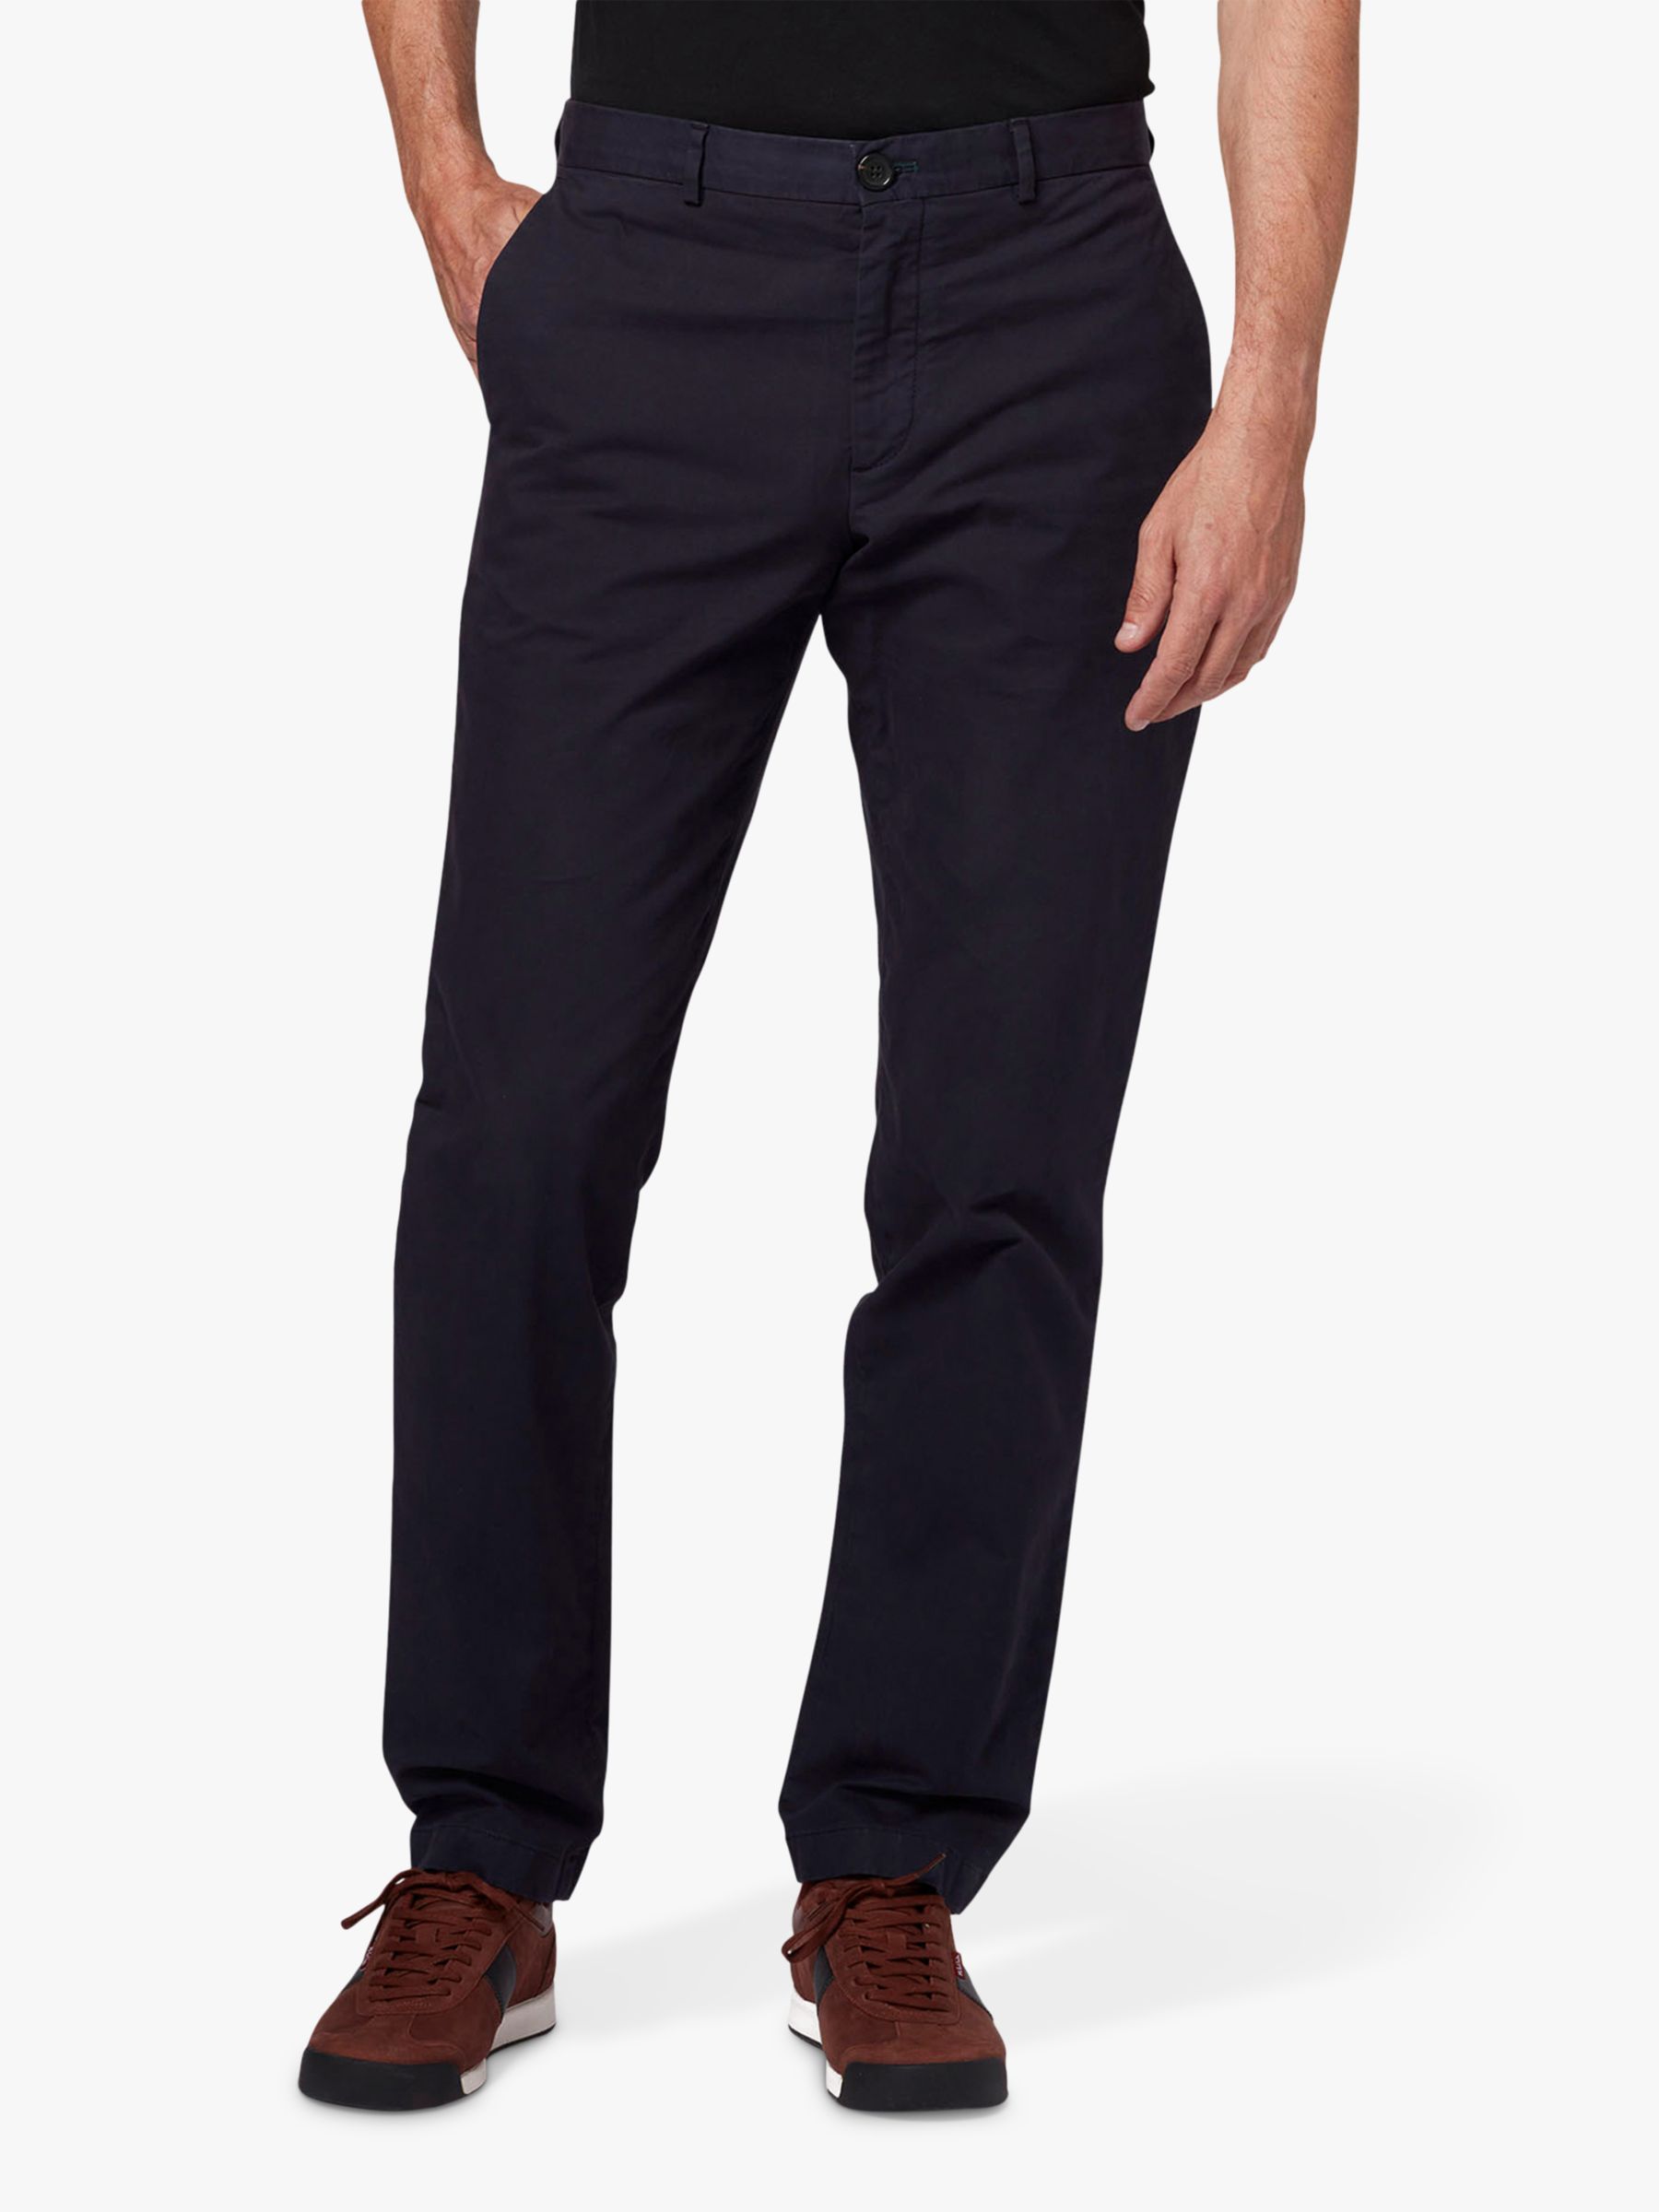 Paul Smith Mid Clean Chinos, Blue, 38R